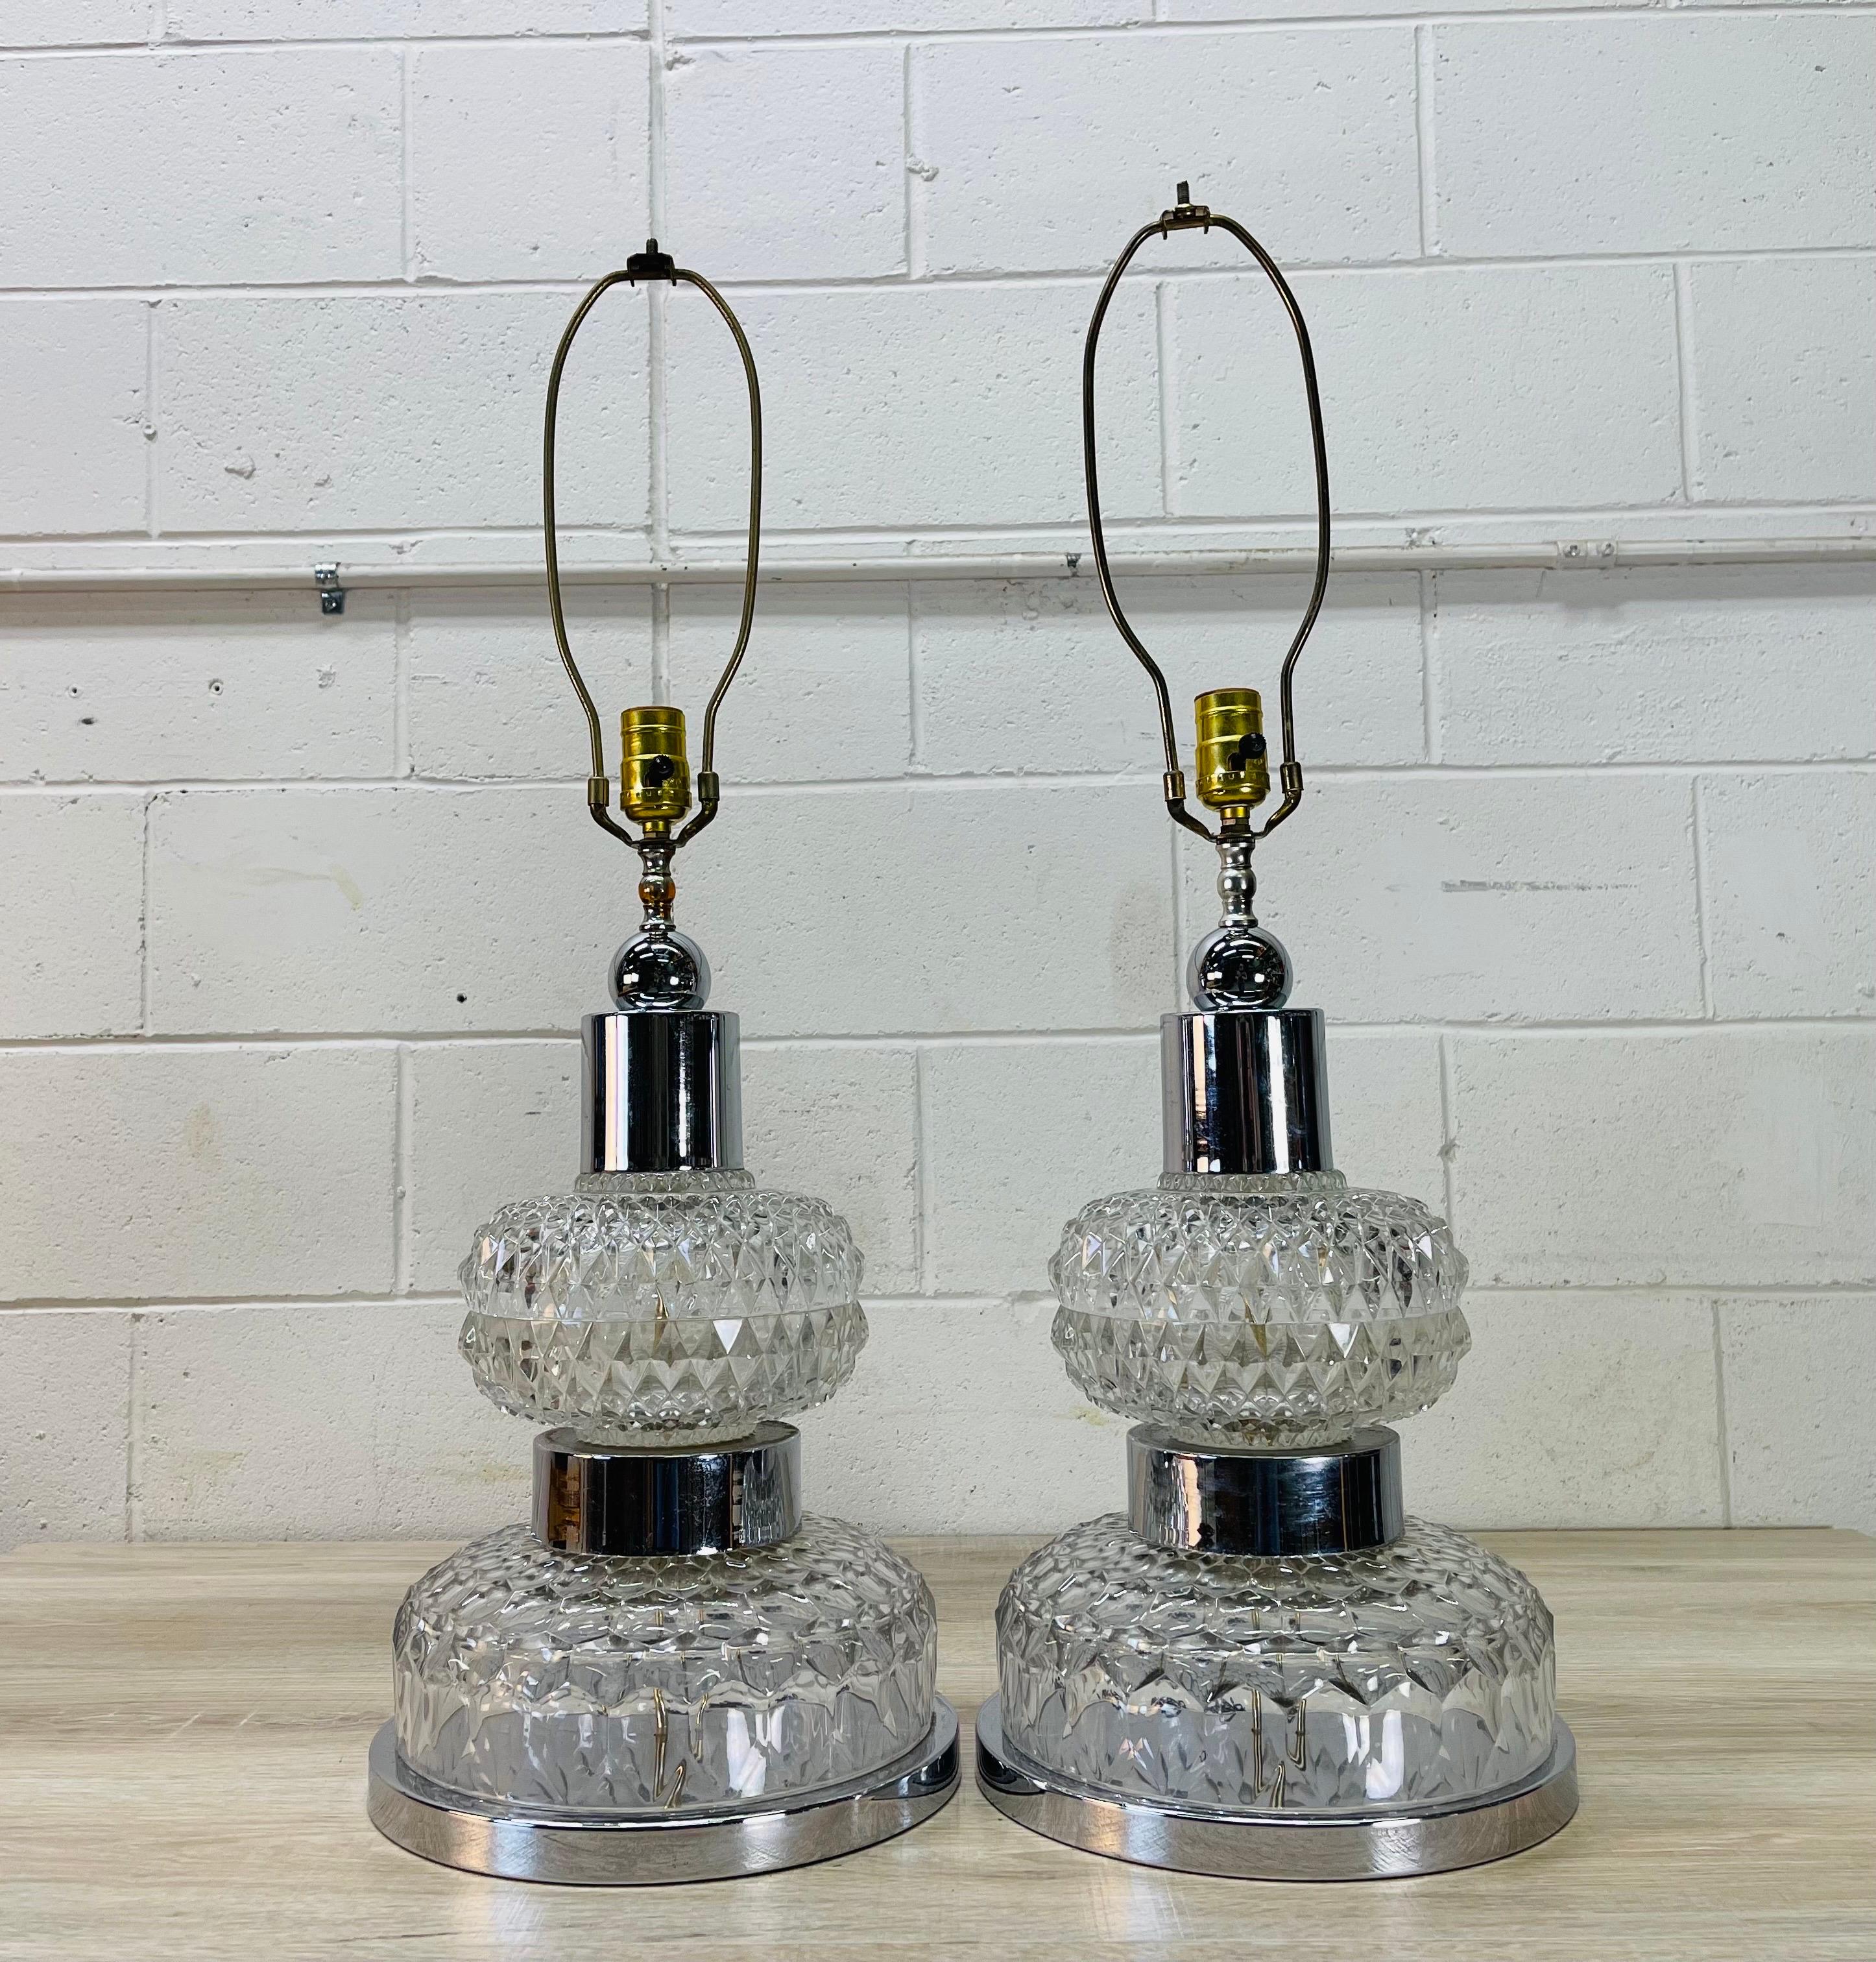 Vintage 1970s pair of chrome and glass table lamps. The glass has a diamond pattern design. The lamps are large and heavy. Wired for the US and in working condition. Socket, 19.75”height. Harp, 4.5”diameter x 10”height. The glass and chrome are both